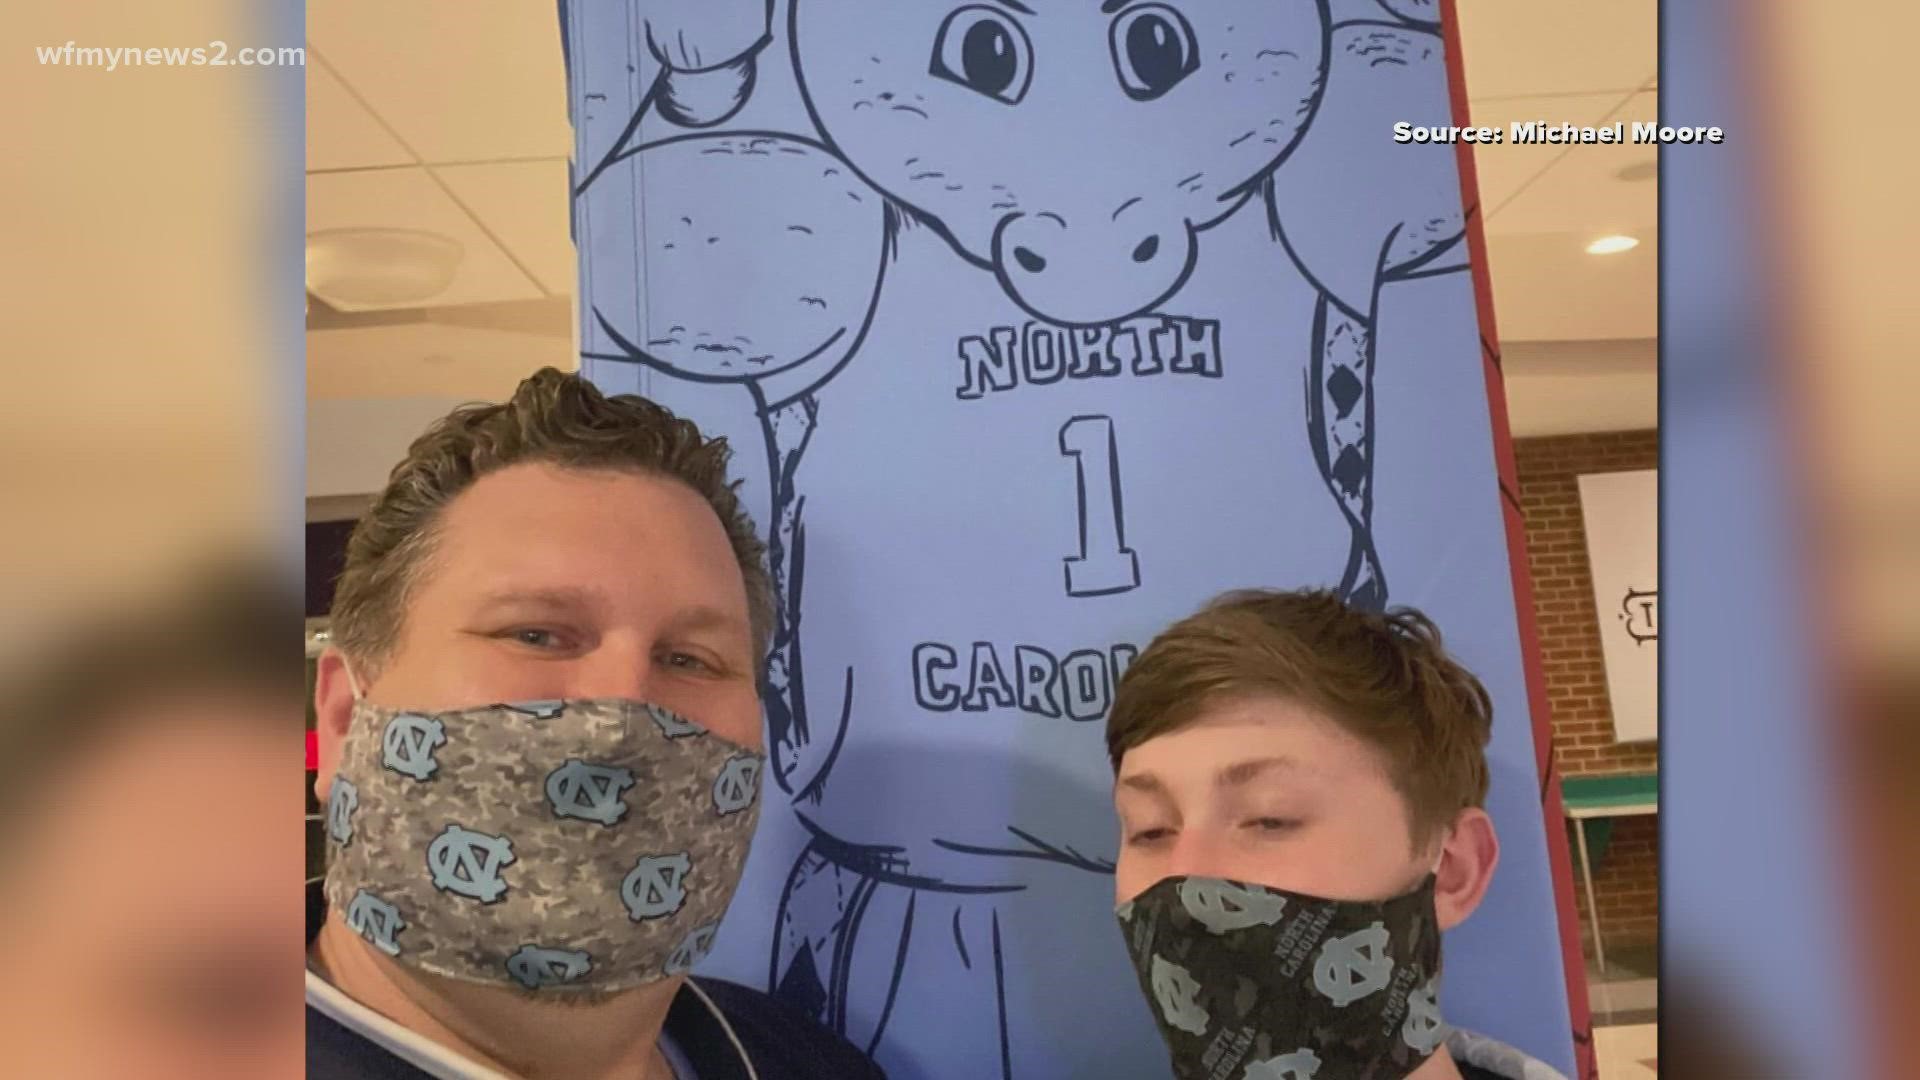 UNC fan is heading to New Orleans with his son to watch his heels take on the blue devils.